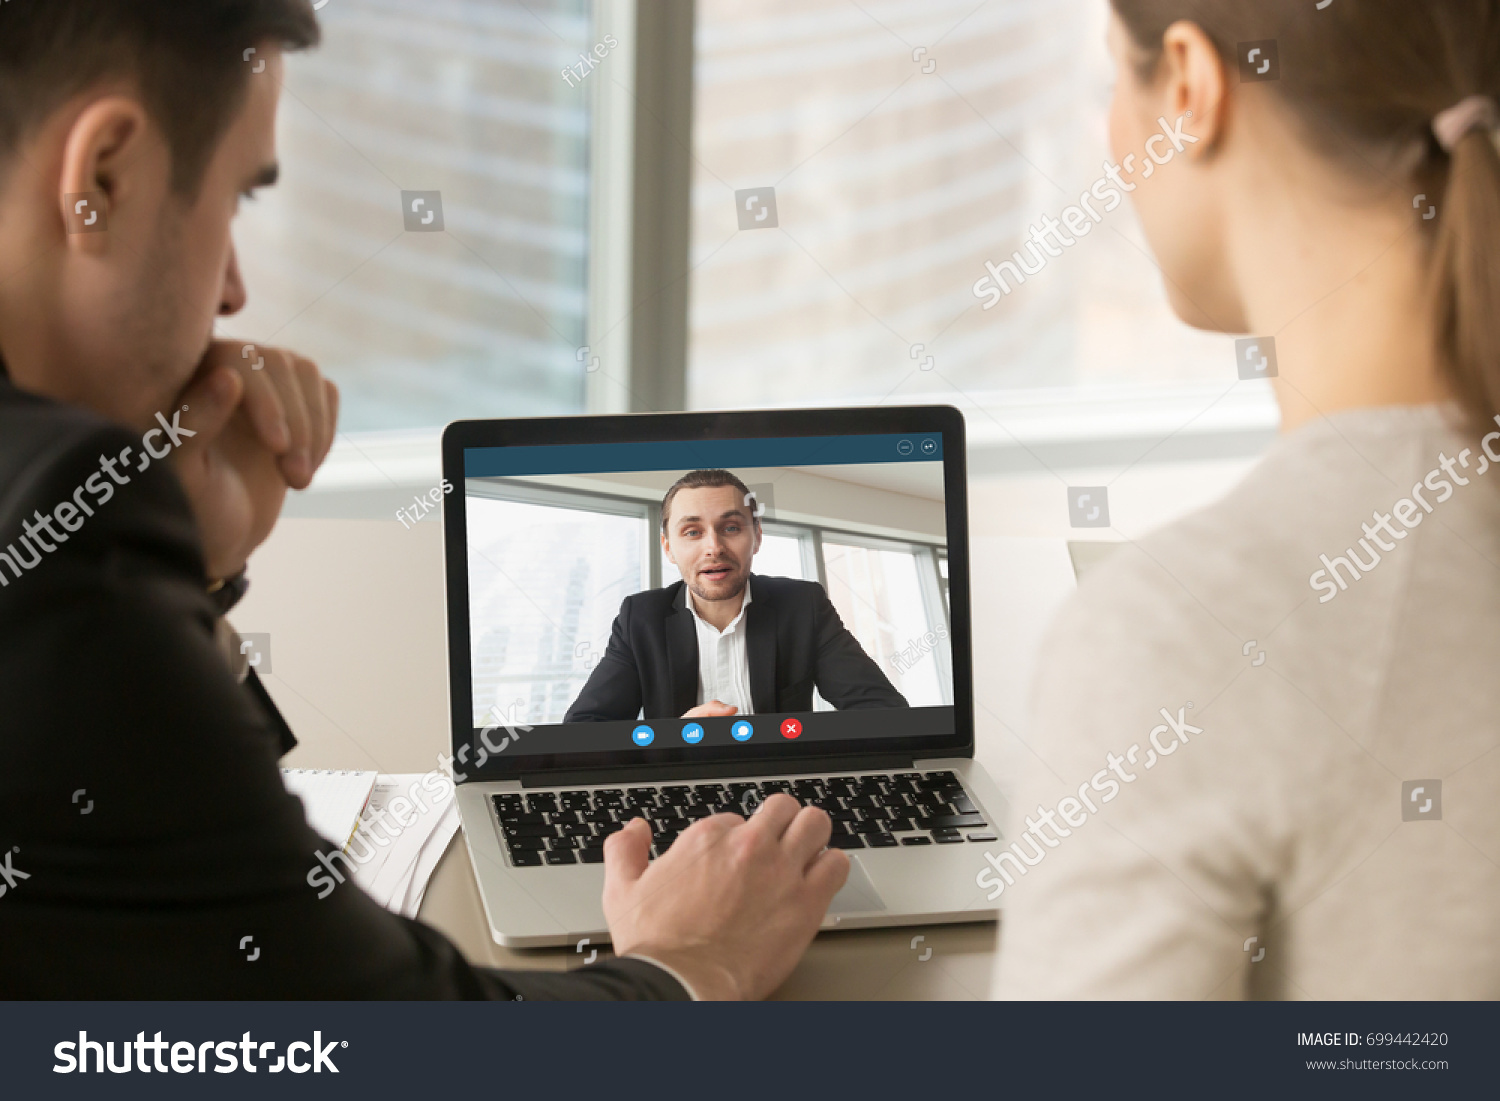 Employees participate virtual conference with boss running business remotely, businesspeople hold online meeting on laptop group chat, entrepreneurs making video call to partner, close up rear view #699442420